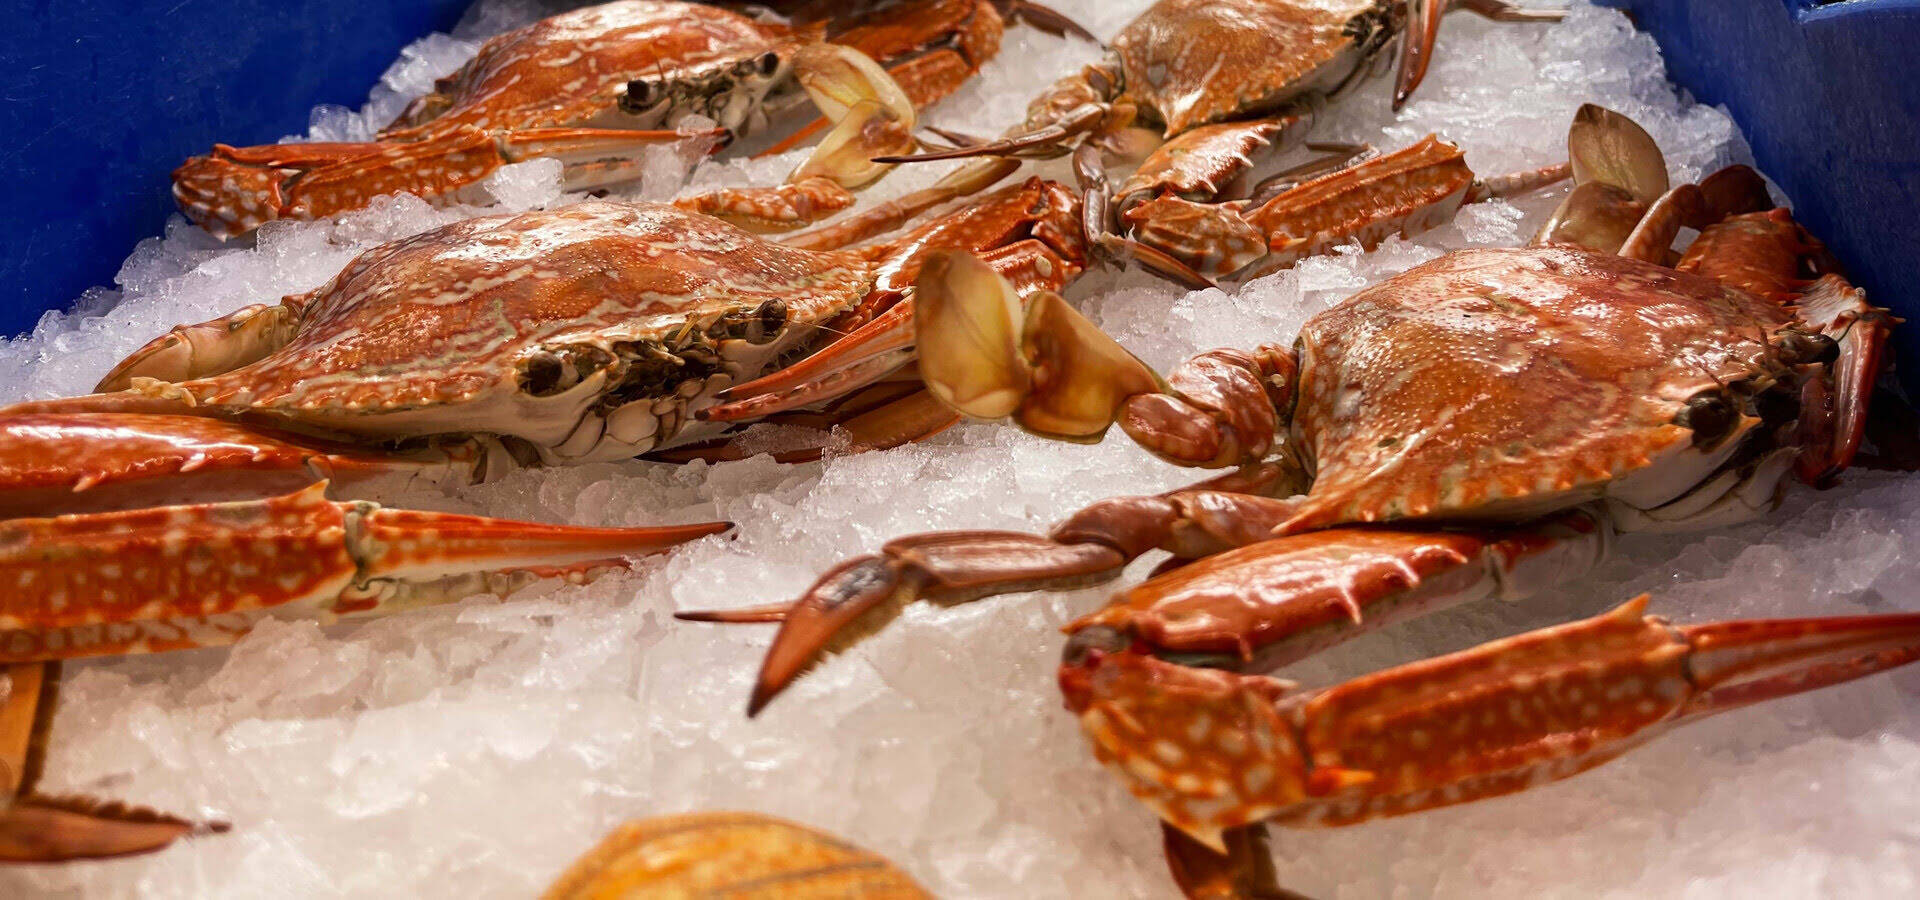 How To Store Live Crabs In The Fridge